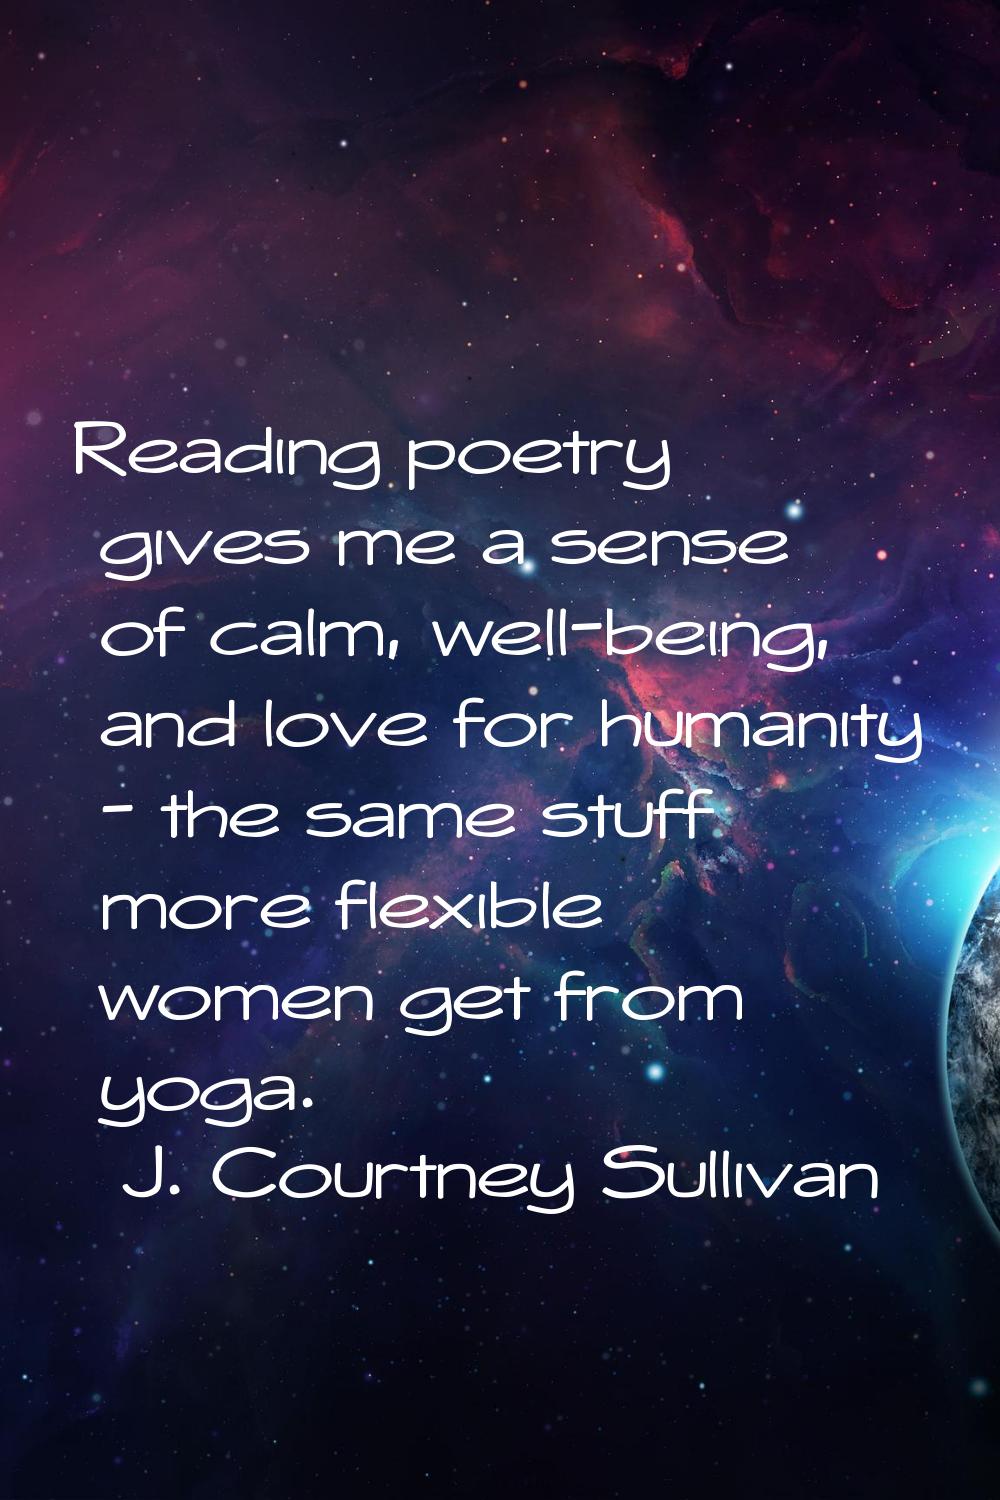 Reading poetry gives me a sense of calm, well-being, and love for humanity - the same stuff more fl